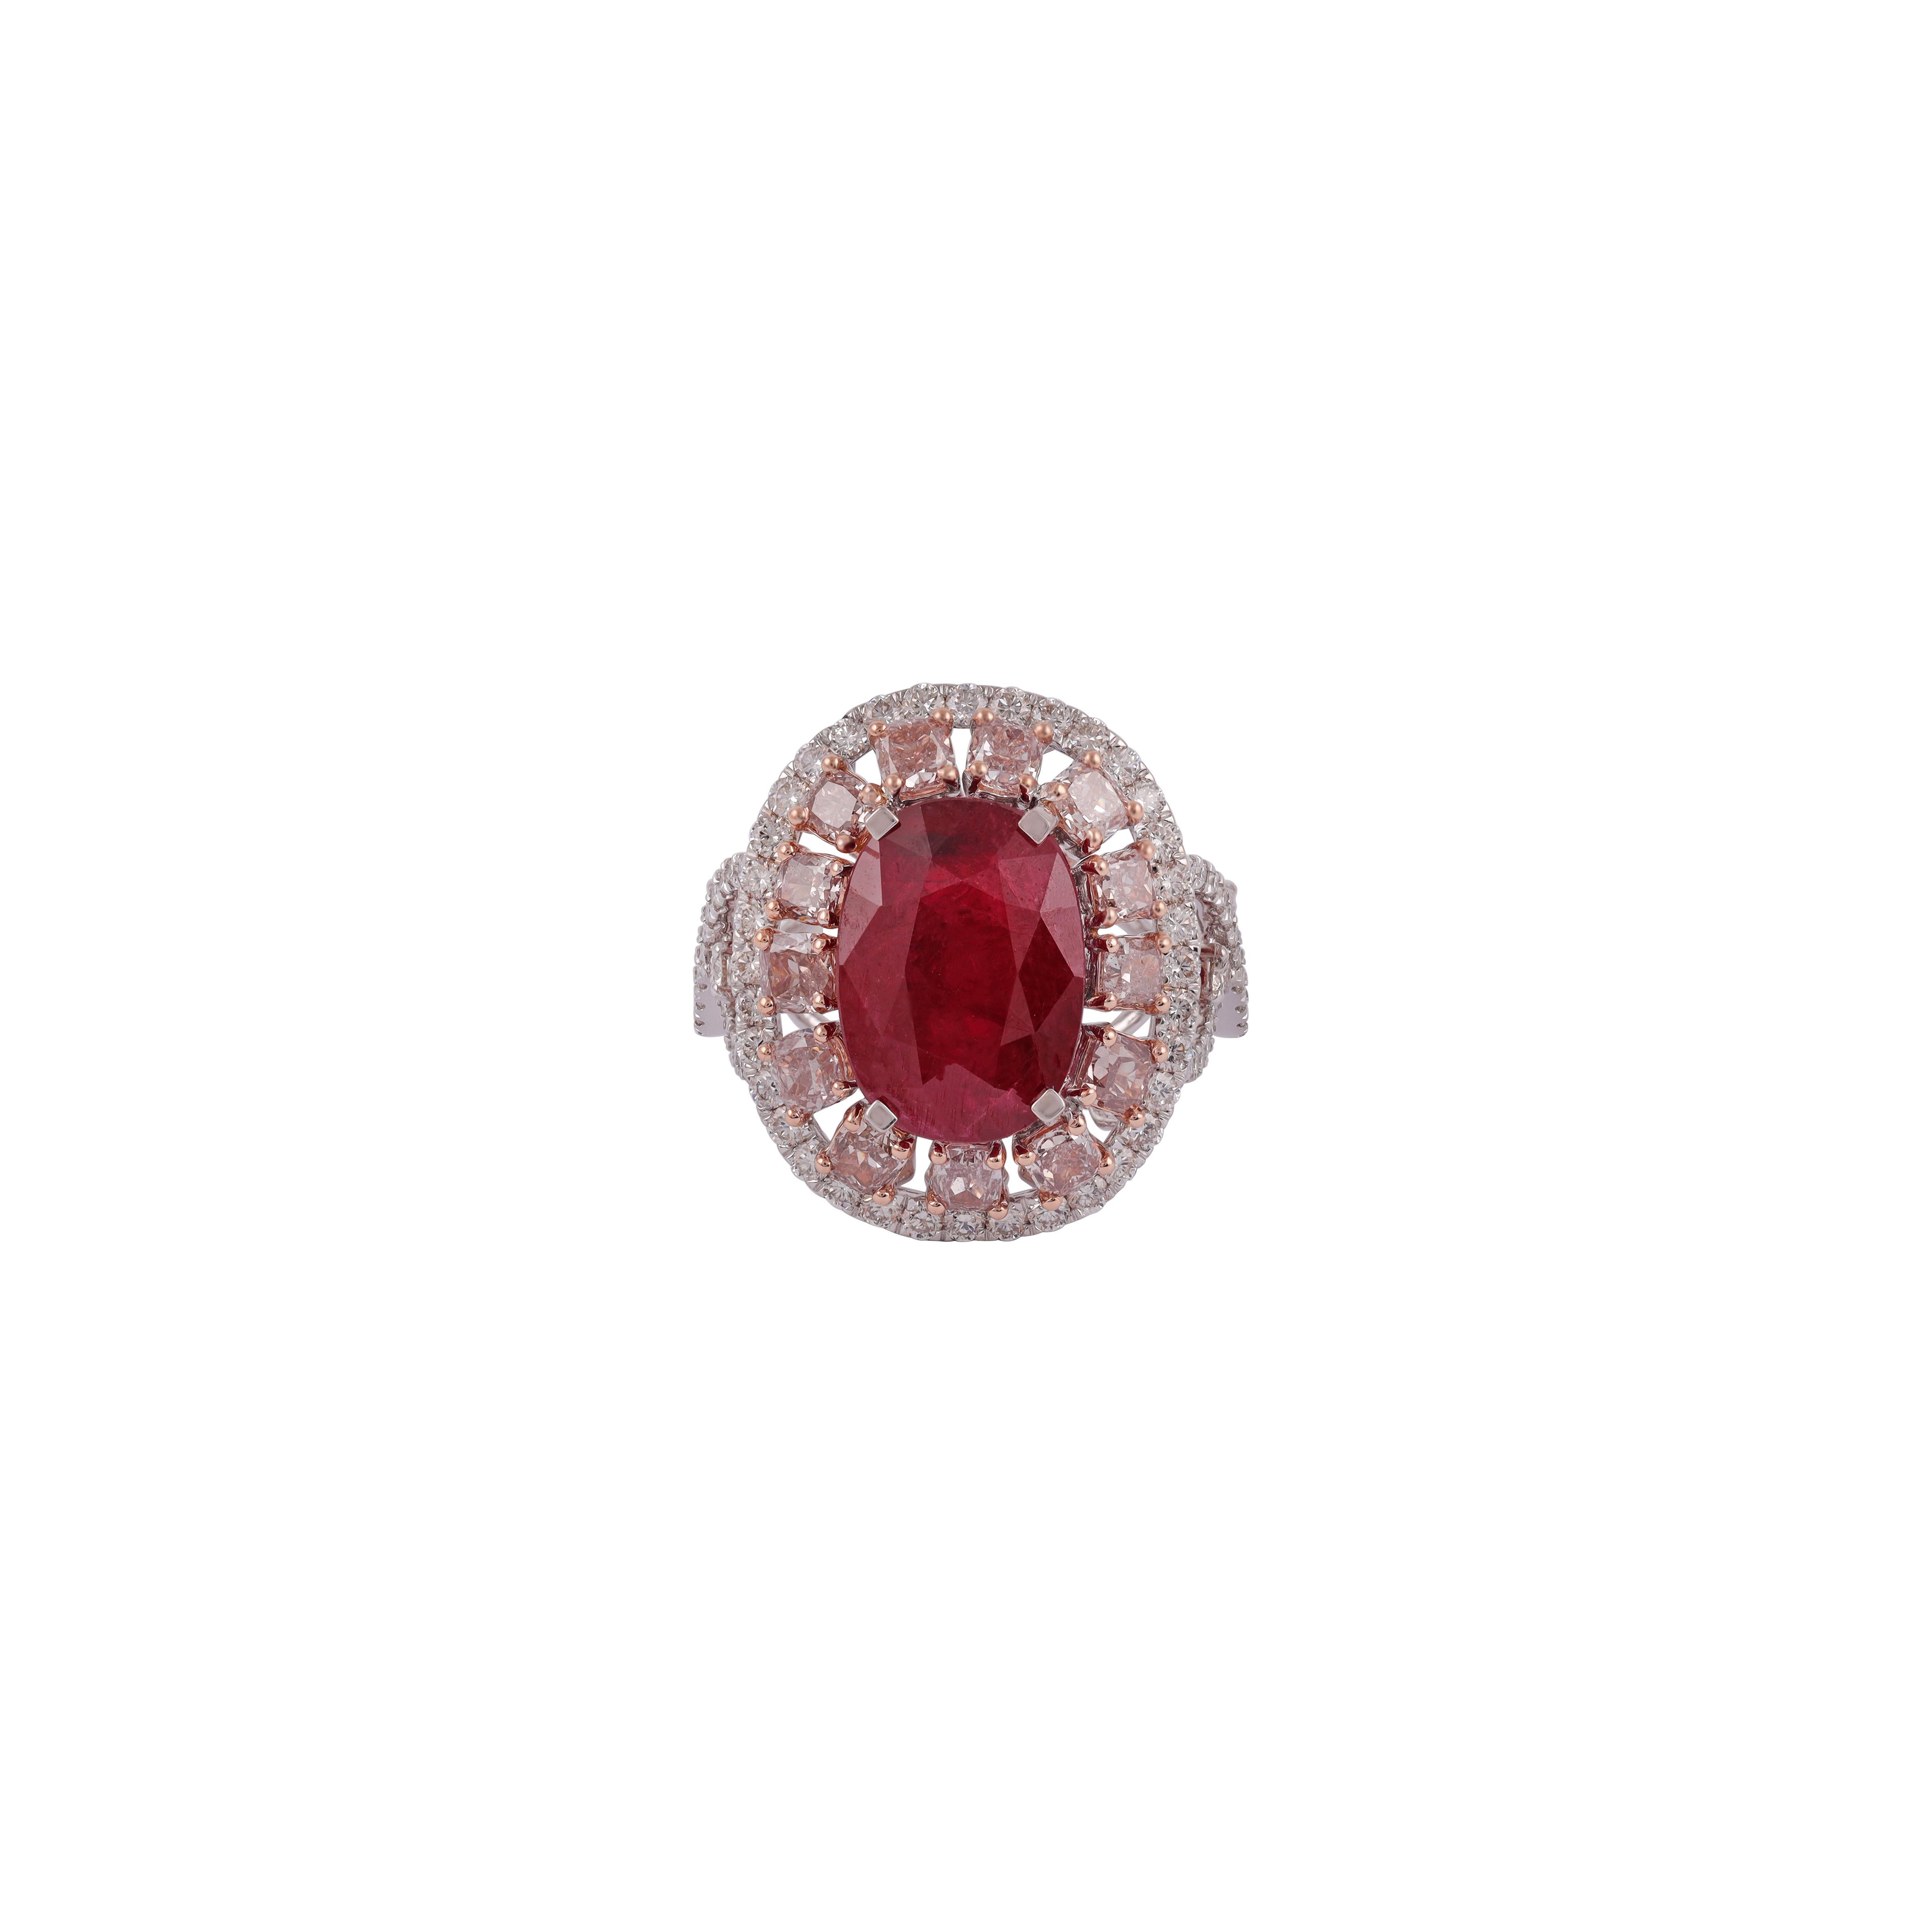 Apart of our carefully curated collection, this ring proudly displays a 5.91 carat High value Clear  Mozambique ruby crowning a 18k White Gold Ring. The ruby's prongs hold the stone tightly but allow it to be seen in its entirety. The center stone